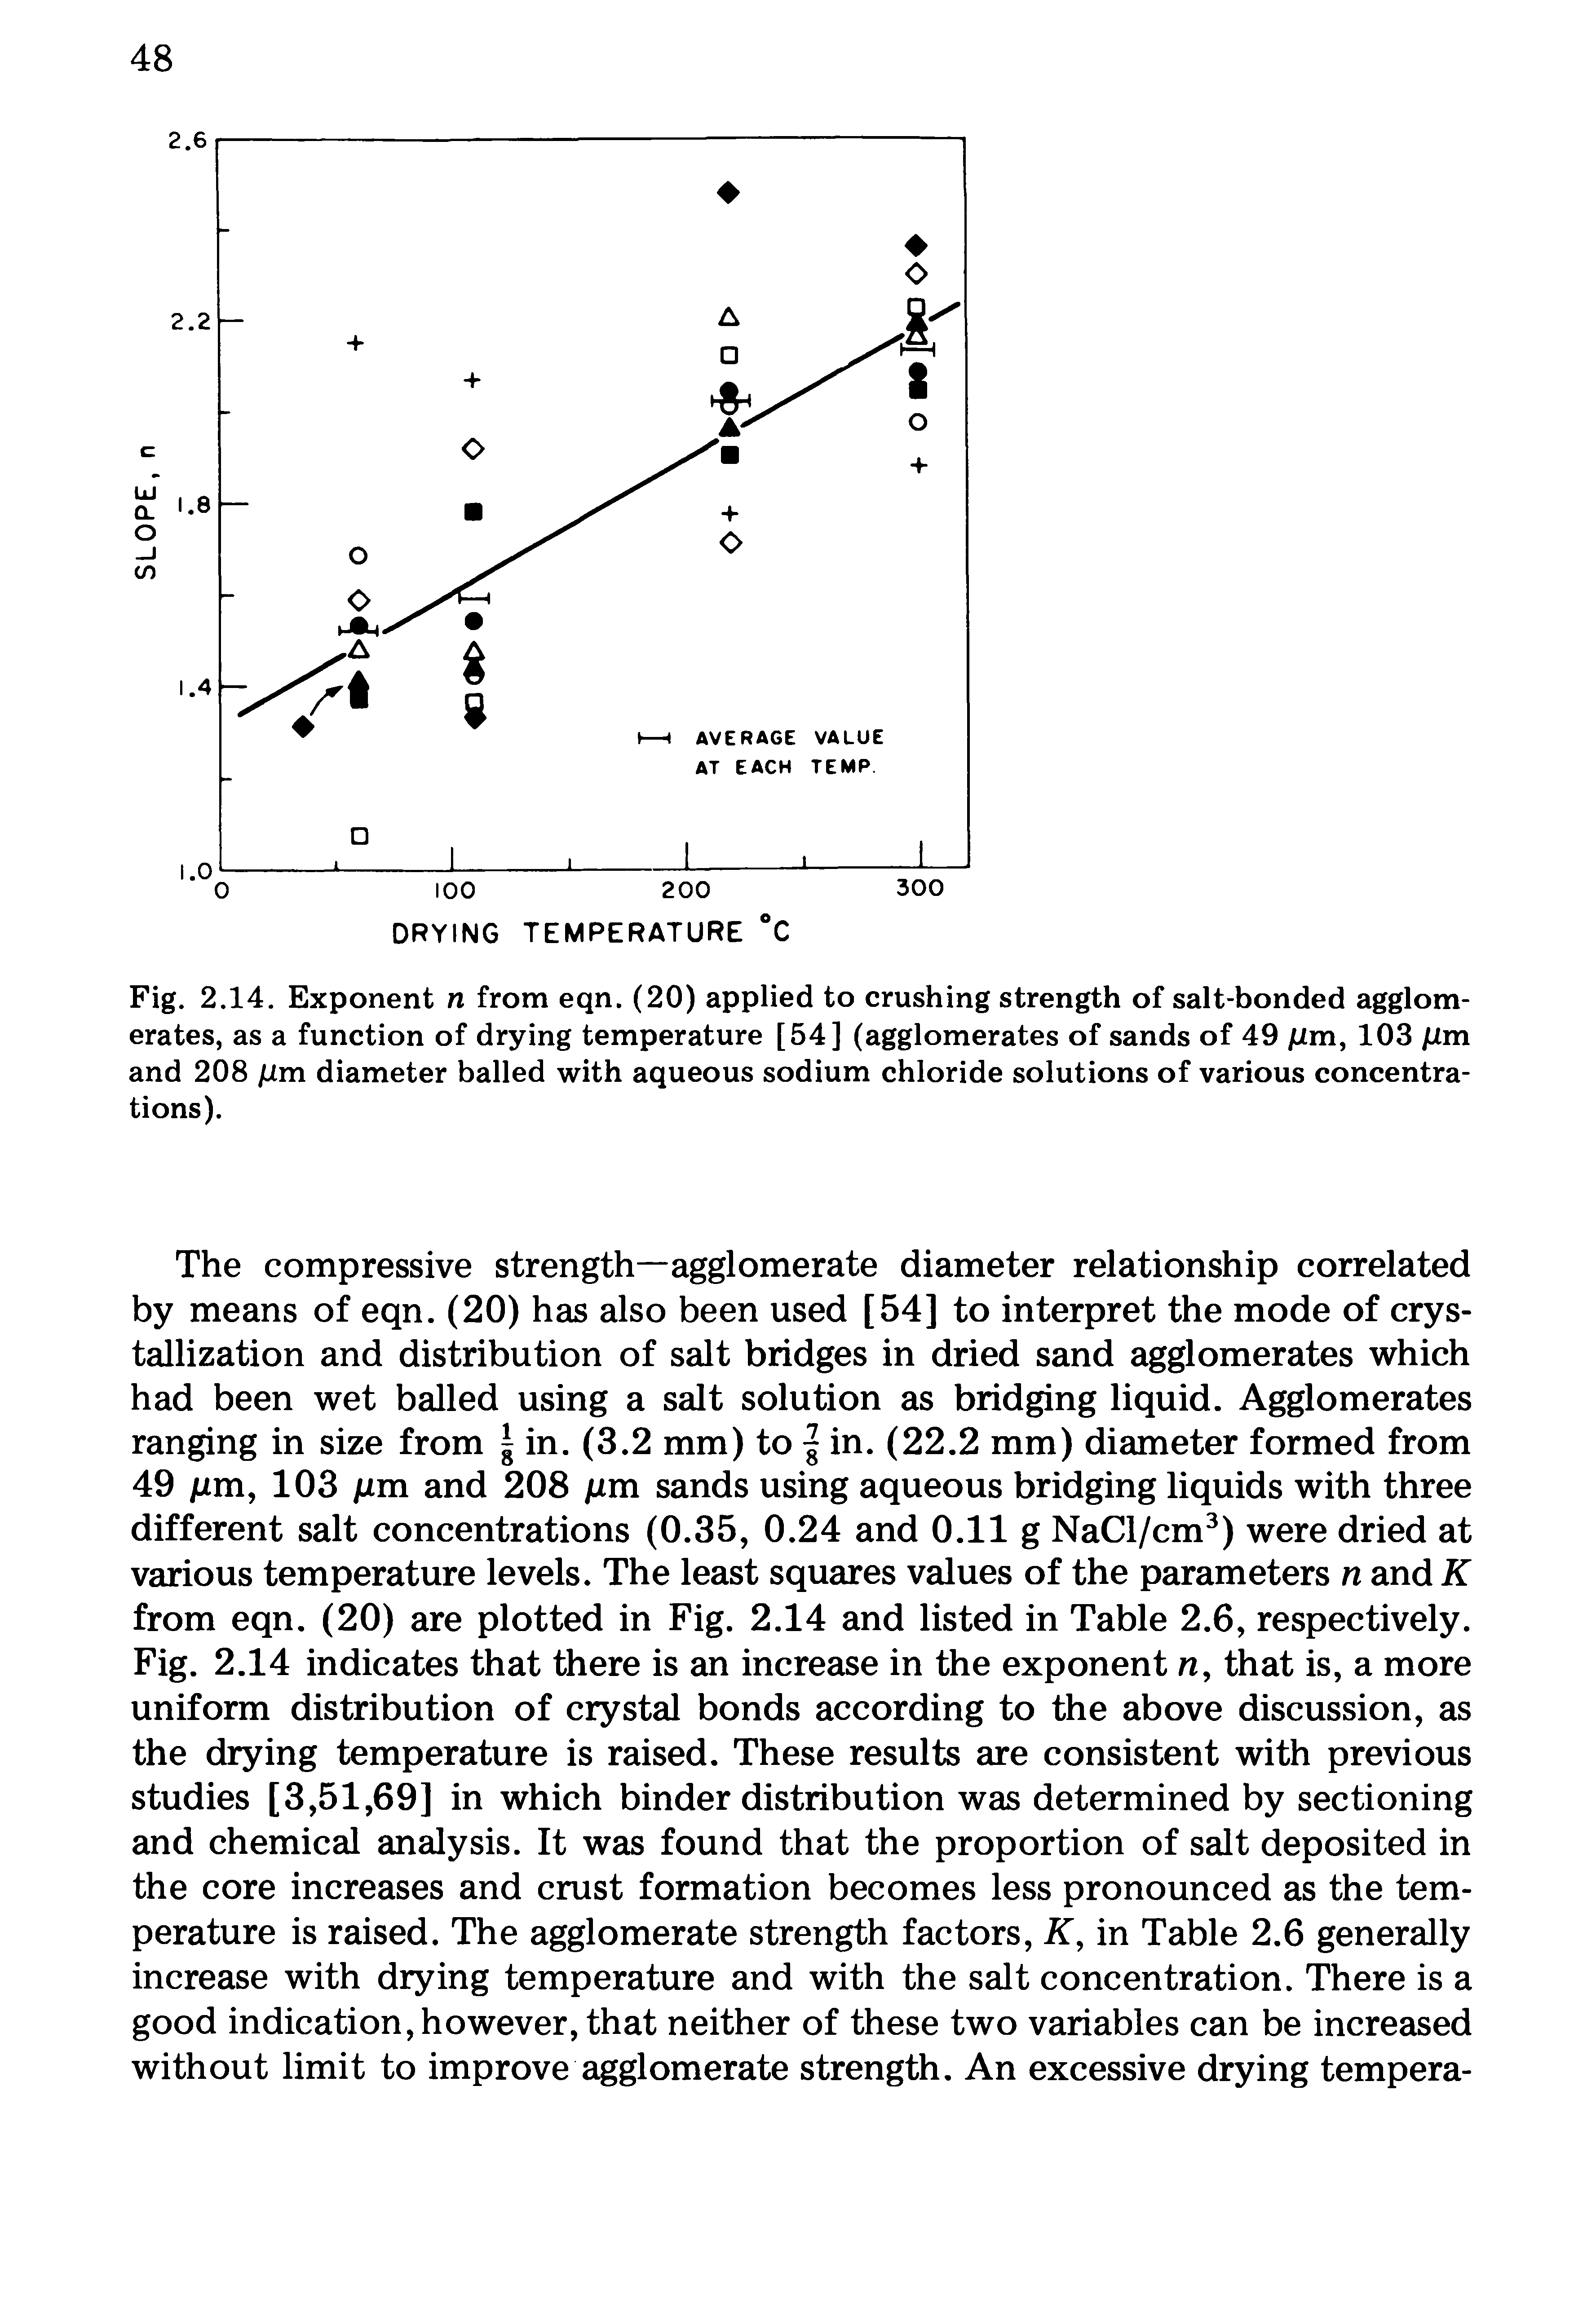 Fig. 2.14. Exponent n from eqn. (20) applied to crushing strength of salt-bonded agglomerates, as a function of drying temperature [54] (agglomerates of sands of 49 /im, 103 jUm and 208 jUm diameter balled with aqueous sodium chloride solutions of various concentrations).